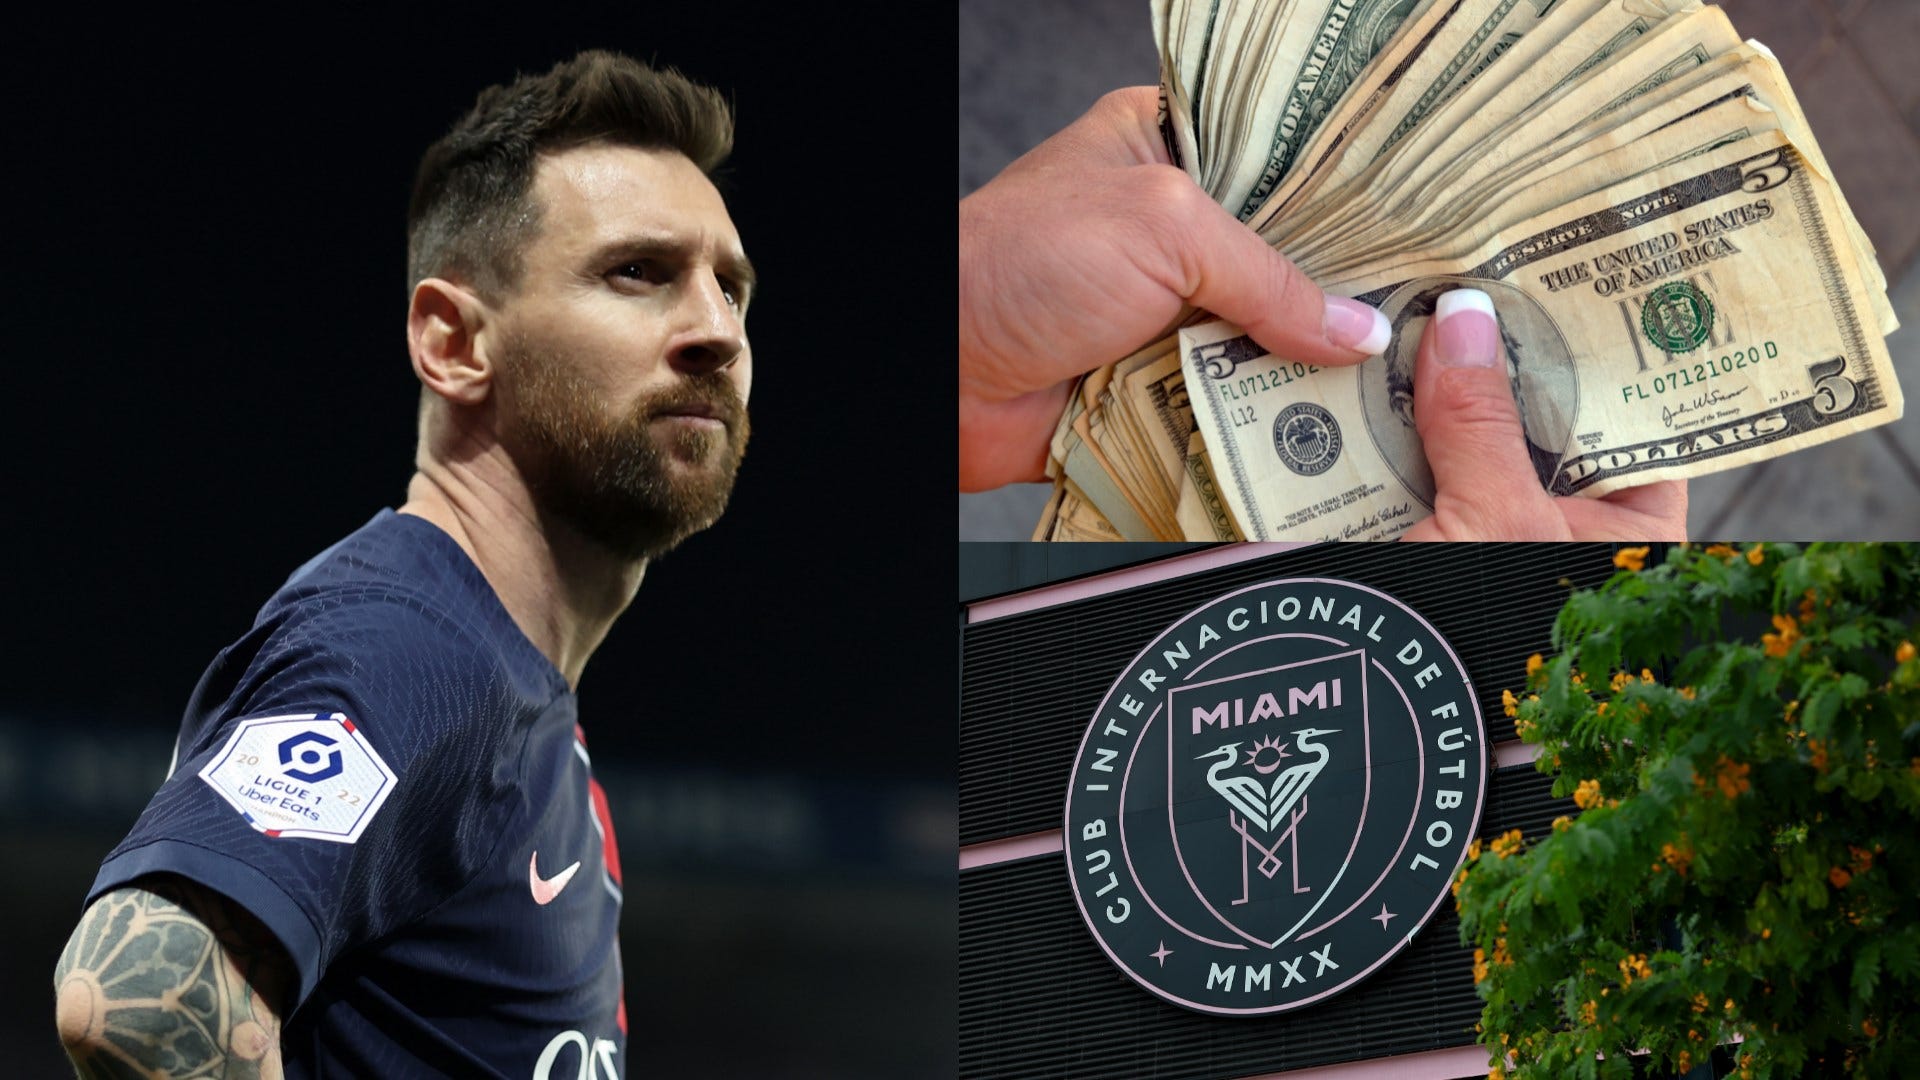 Miami pays the price for Messi with record-breaking ticket prices